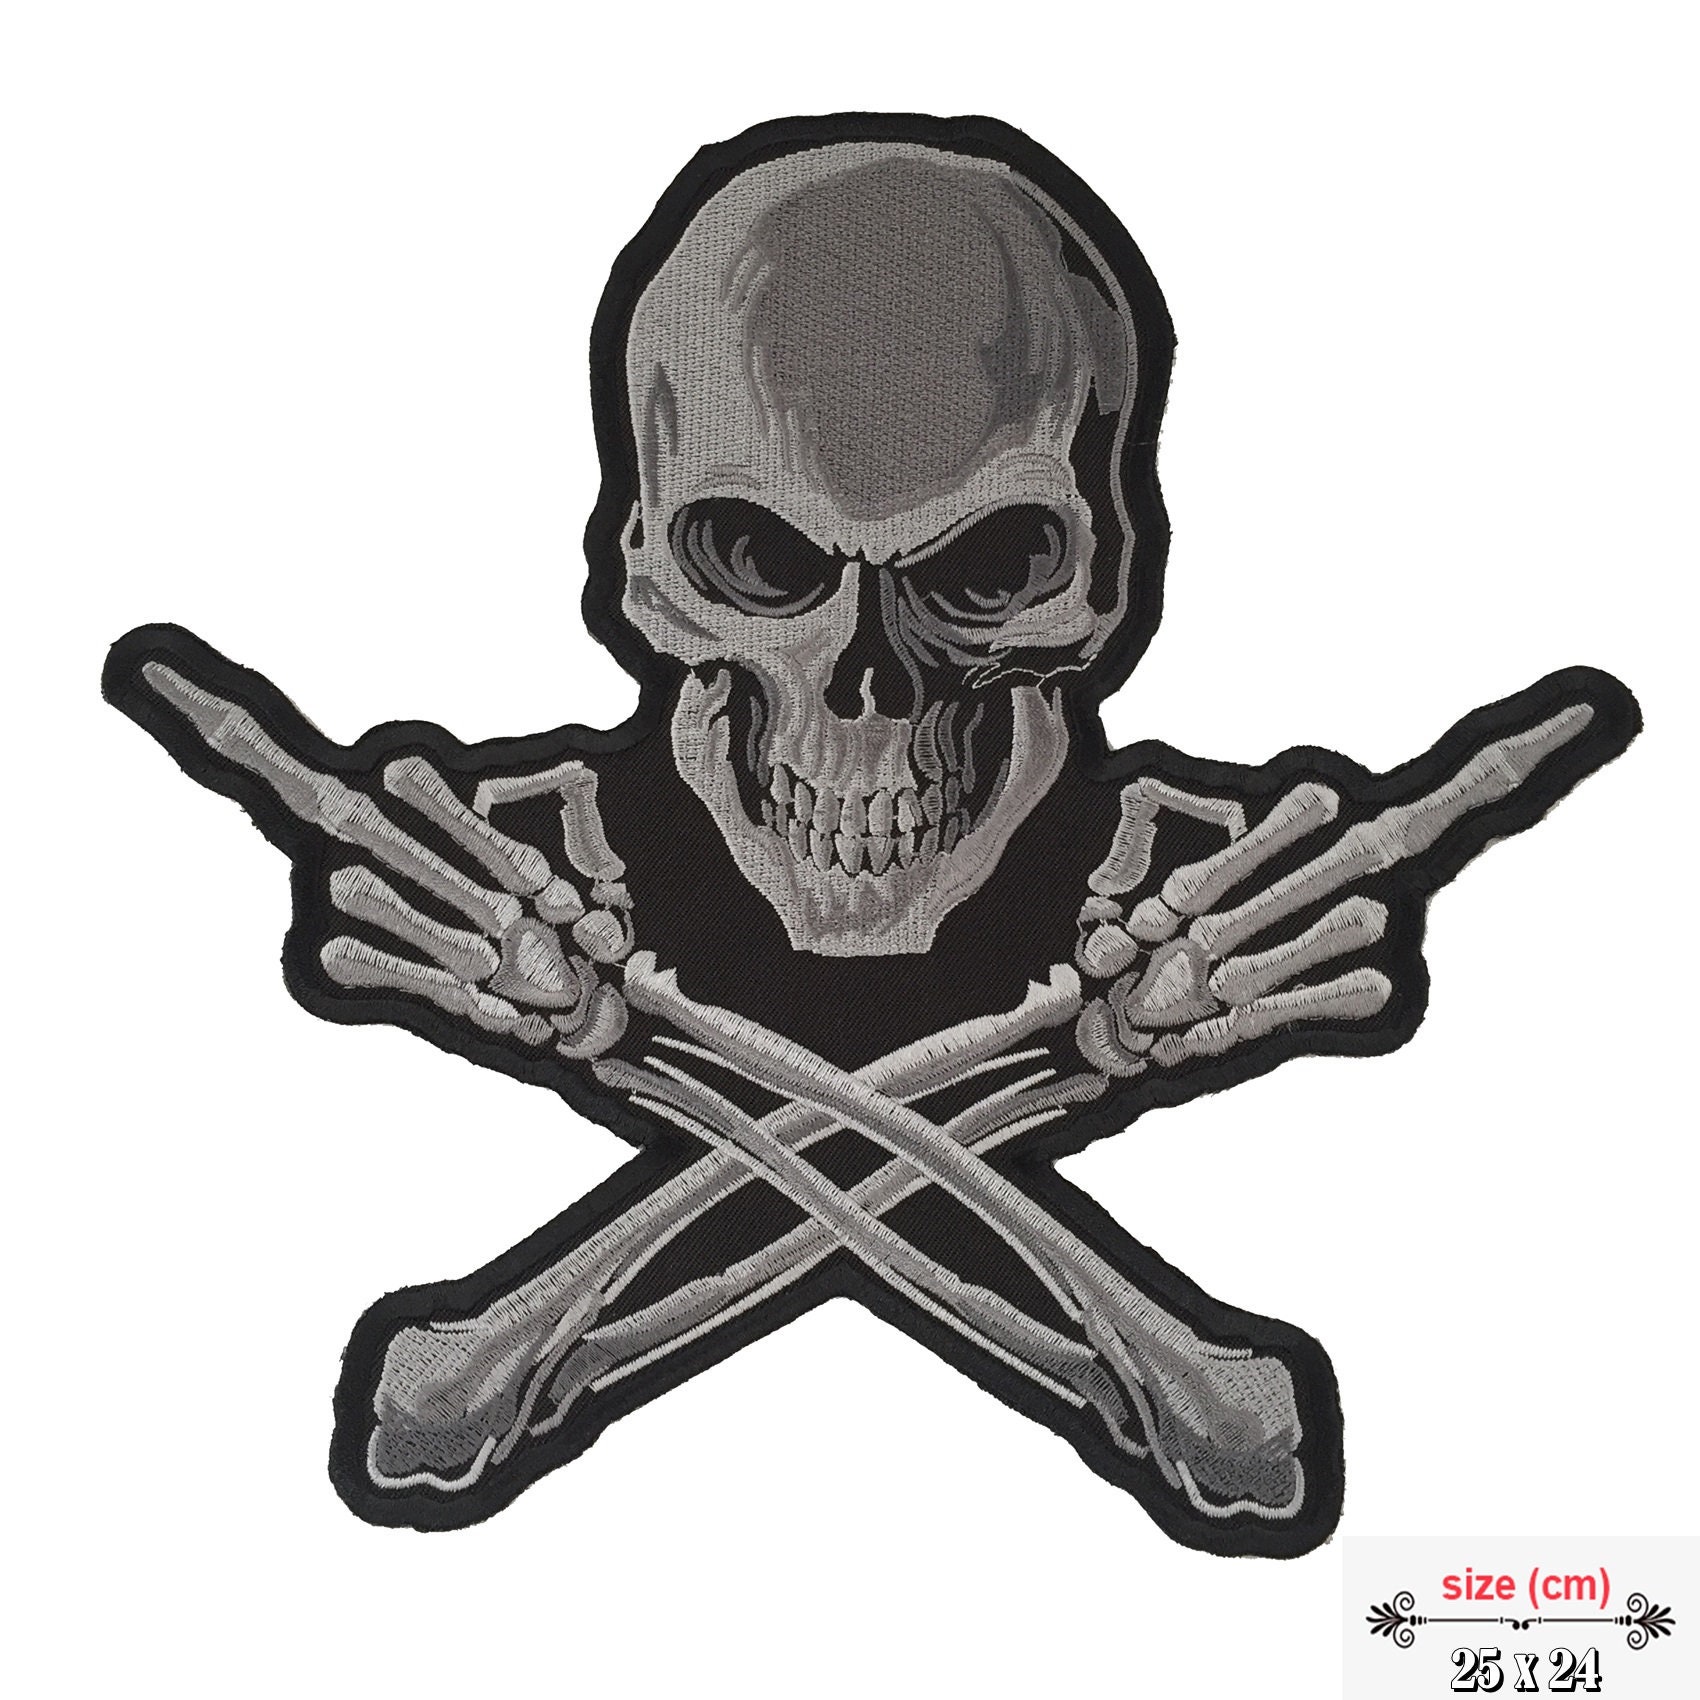 Skeleton Rider FAFO Patch, Large Skull Patches for Biker Jackets by Ivamis  Patches